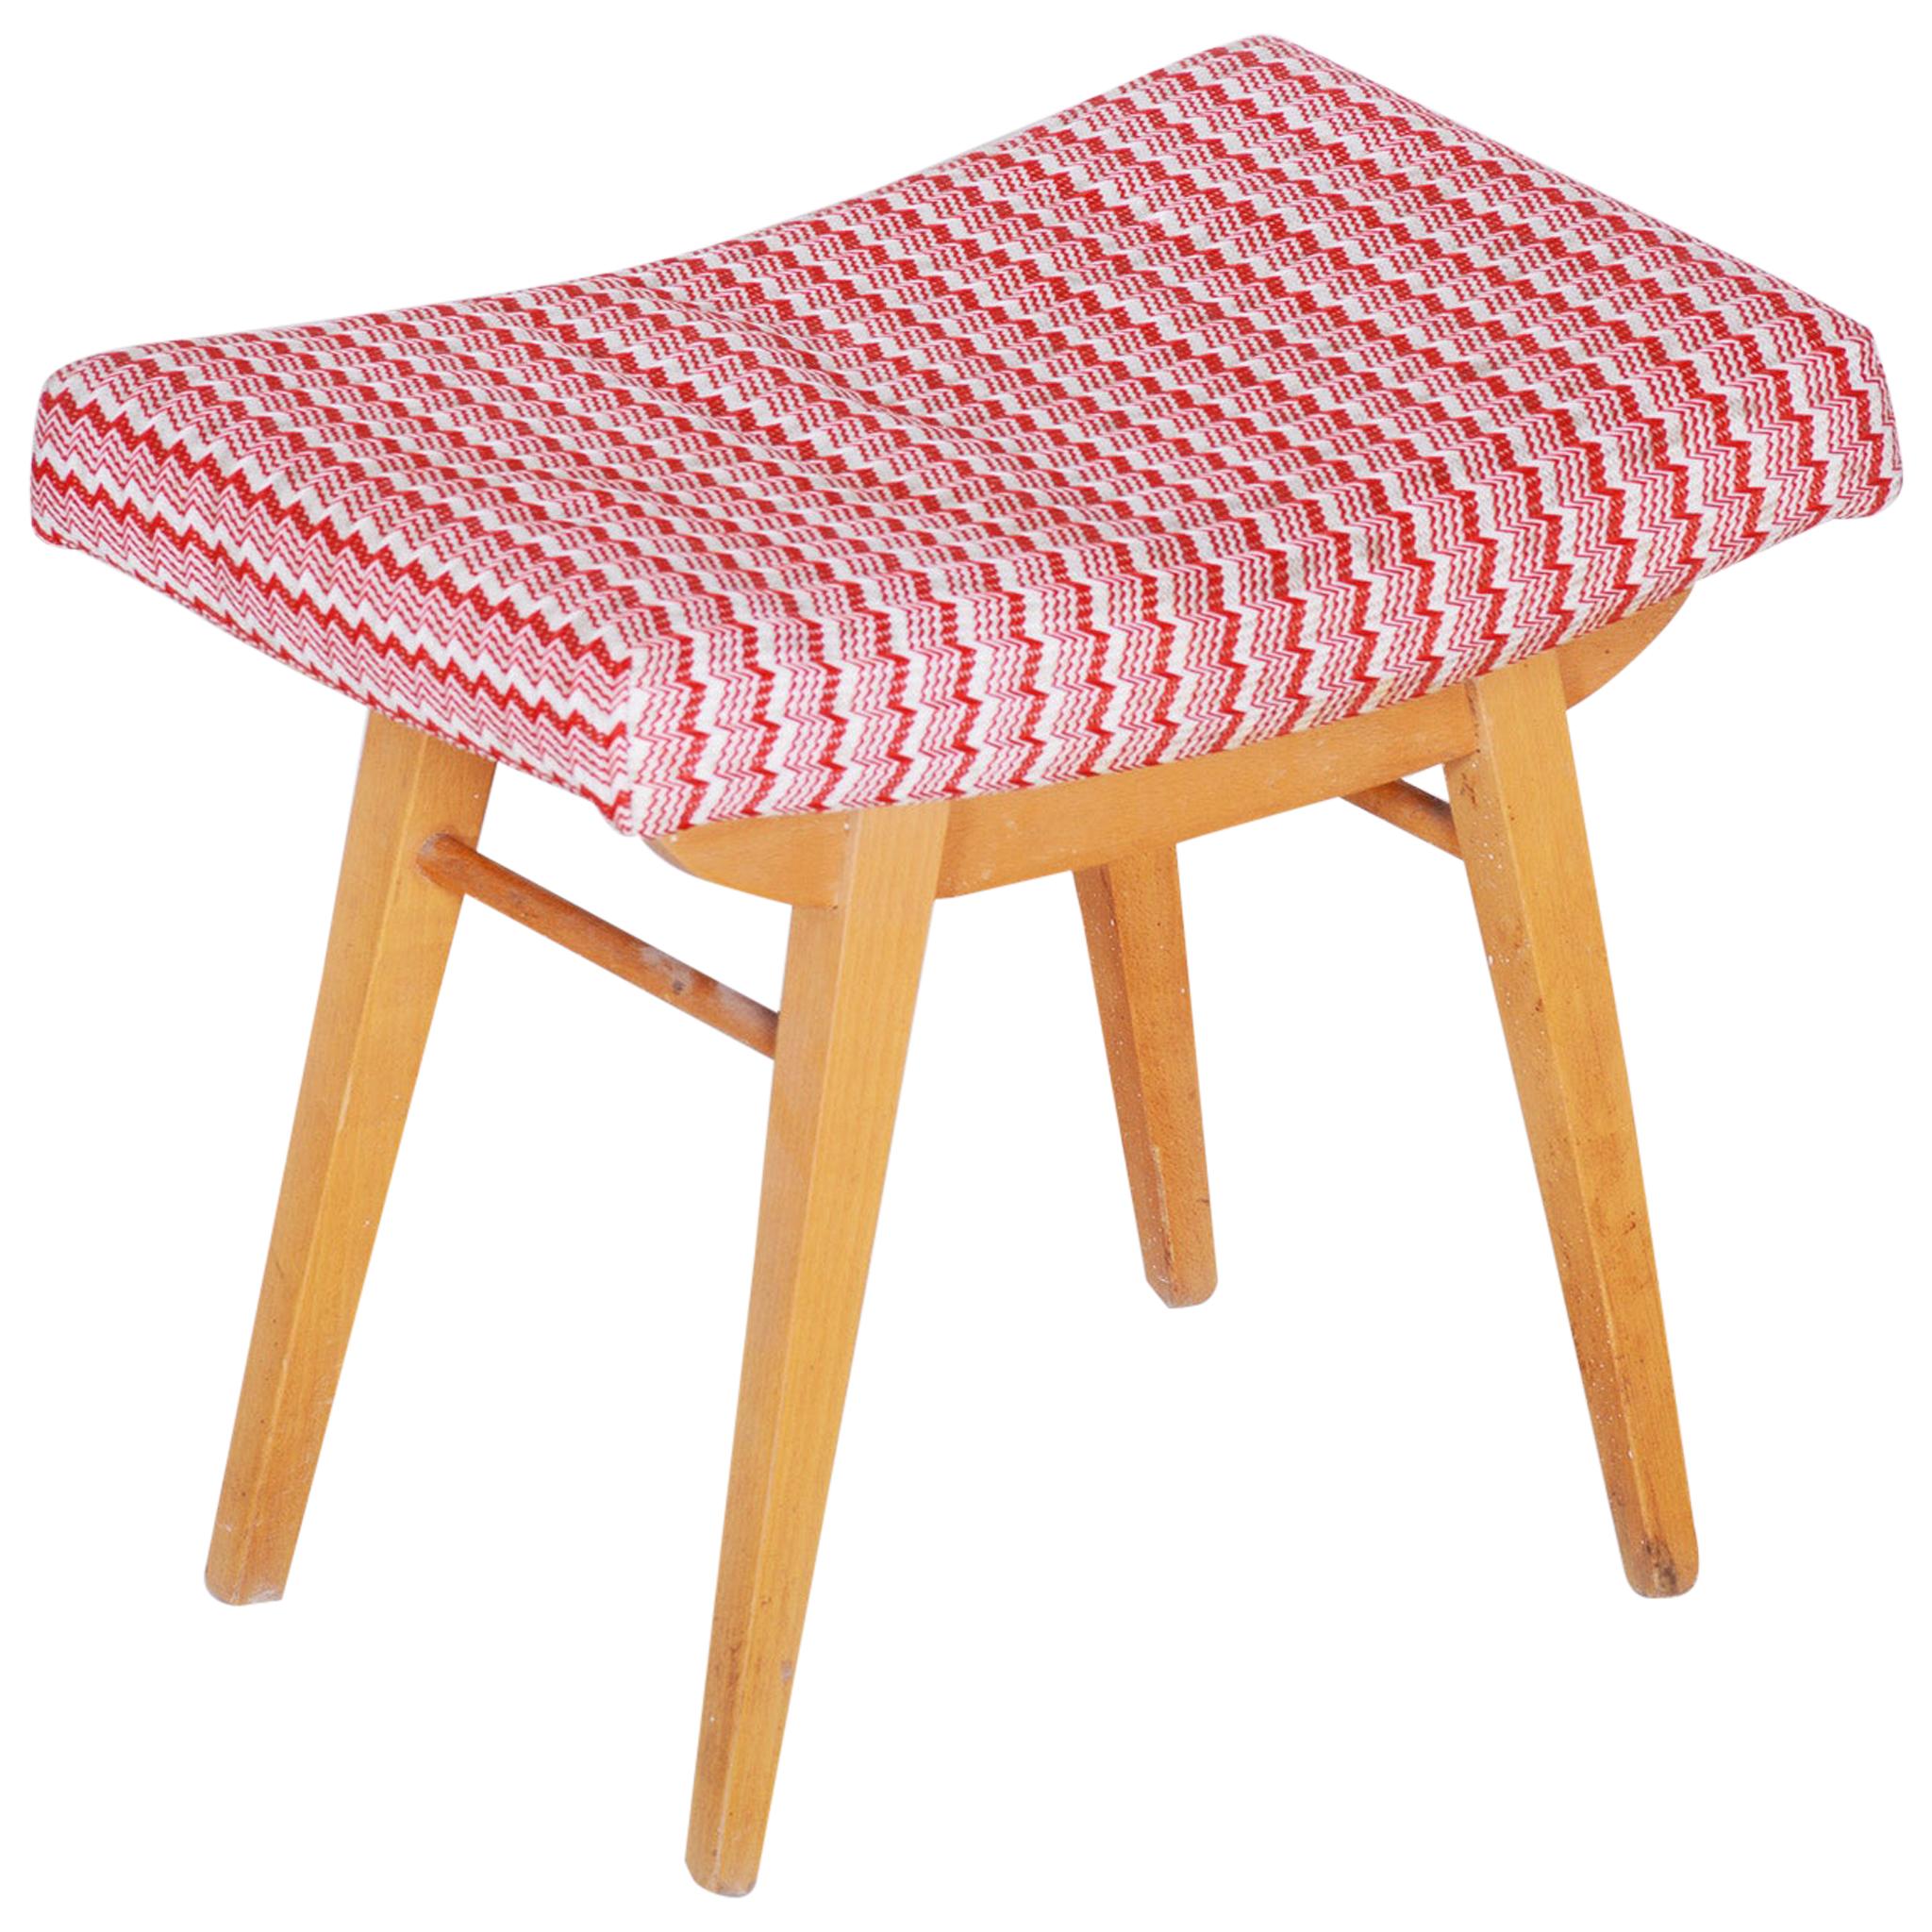 Red and White Midcentury Beech Stool, 1960s, Original Preserved Condition For Sale